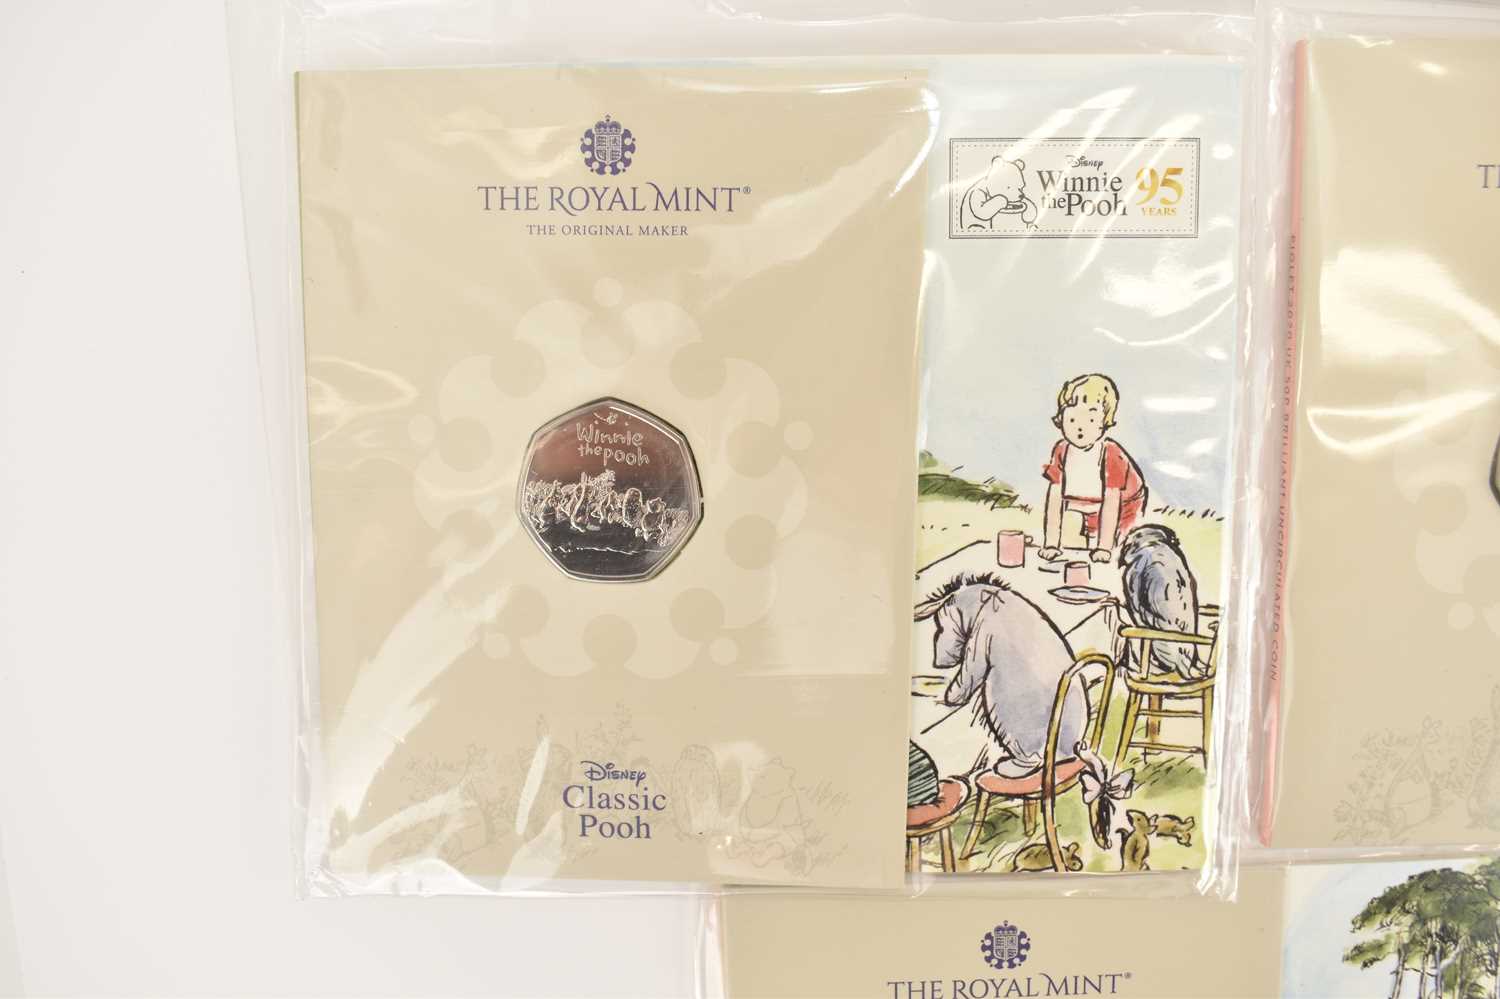 THE ROYAL MINT; 'Disney Winnie-the-Pooh Ninety-five Years' and 'Classic Pooh' twelve UK 50p - Image 6 of 7